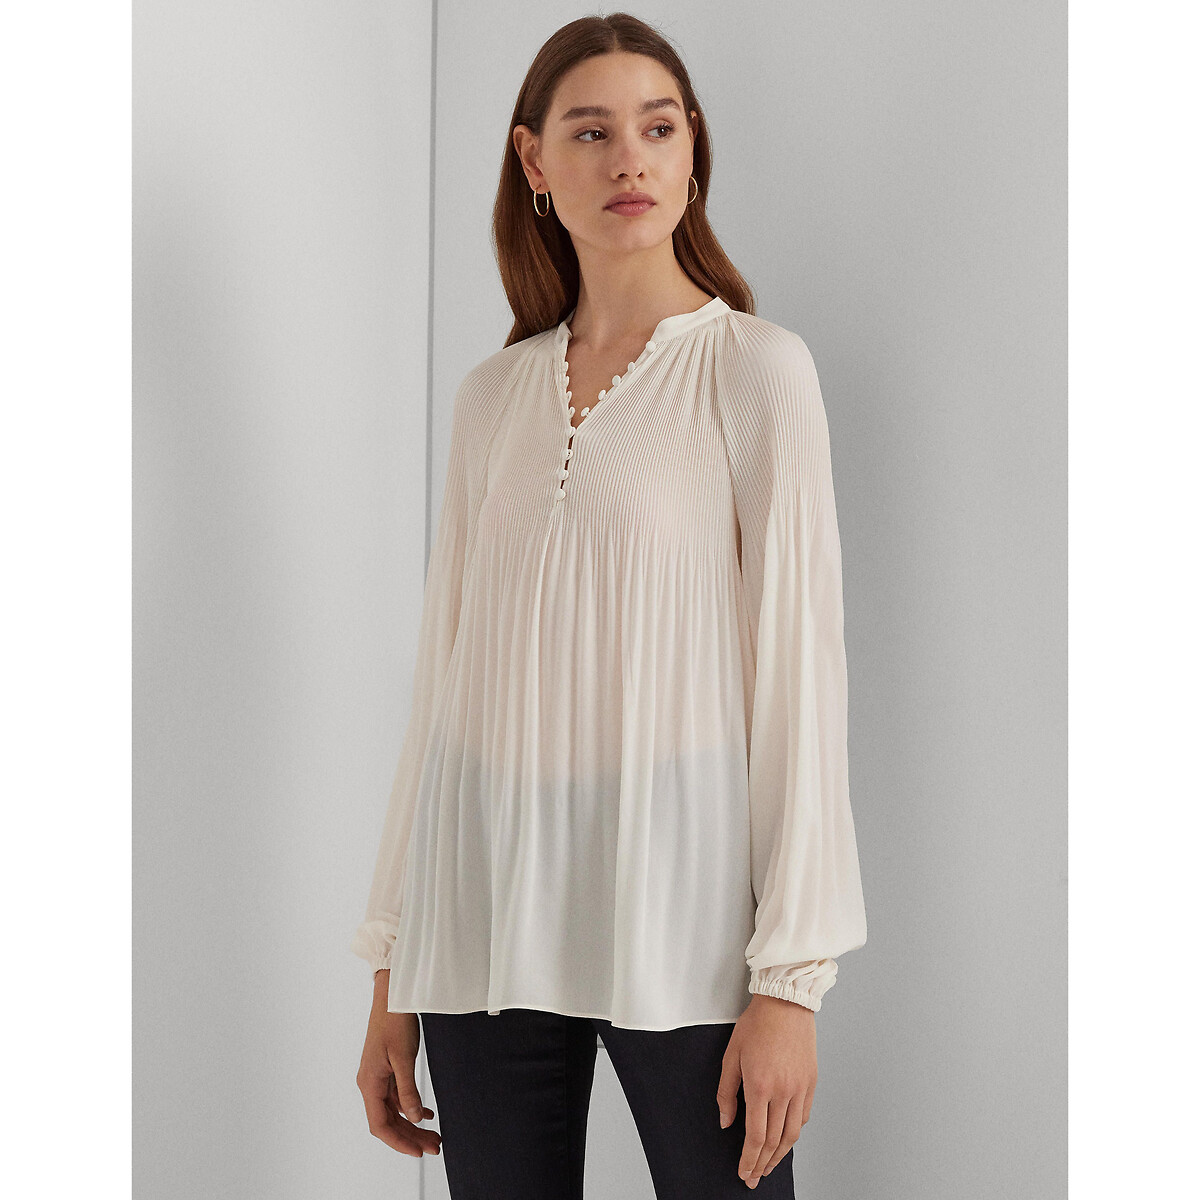 Versilla Voile Blouse with Long Sleeves